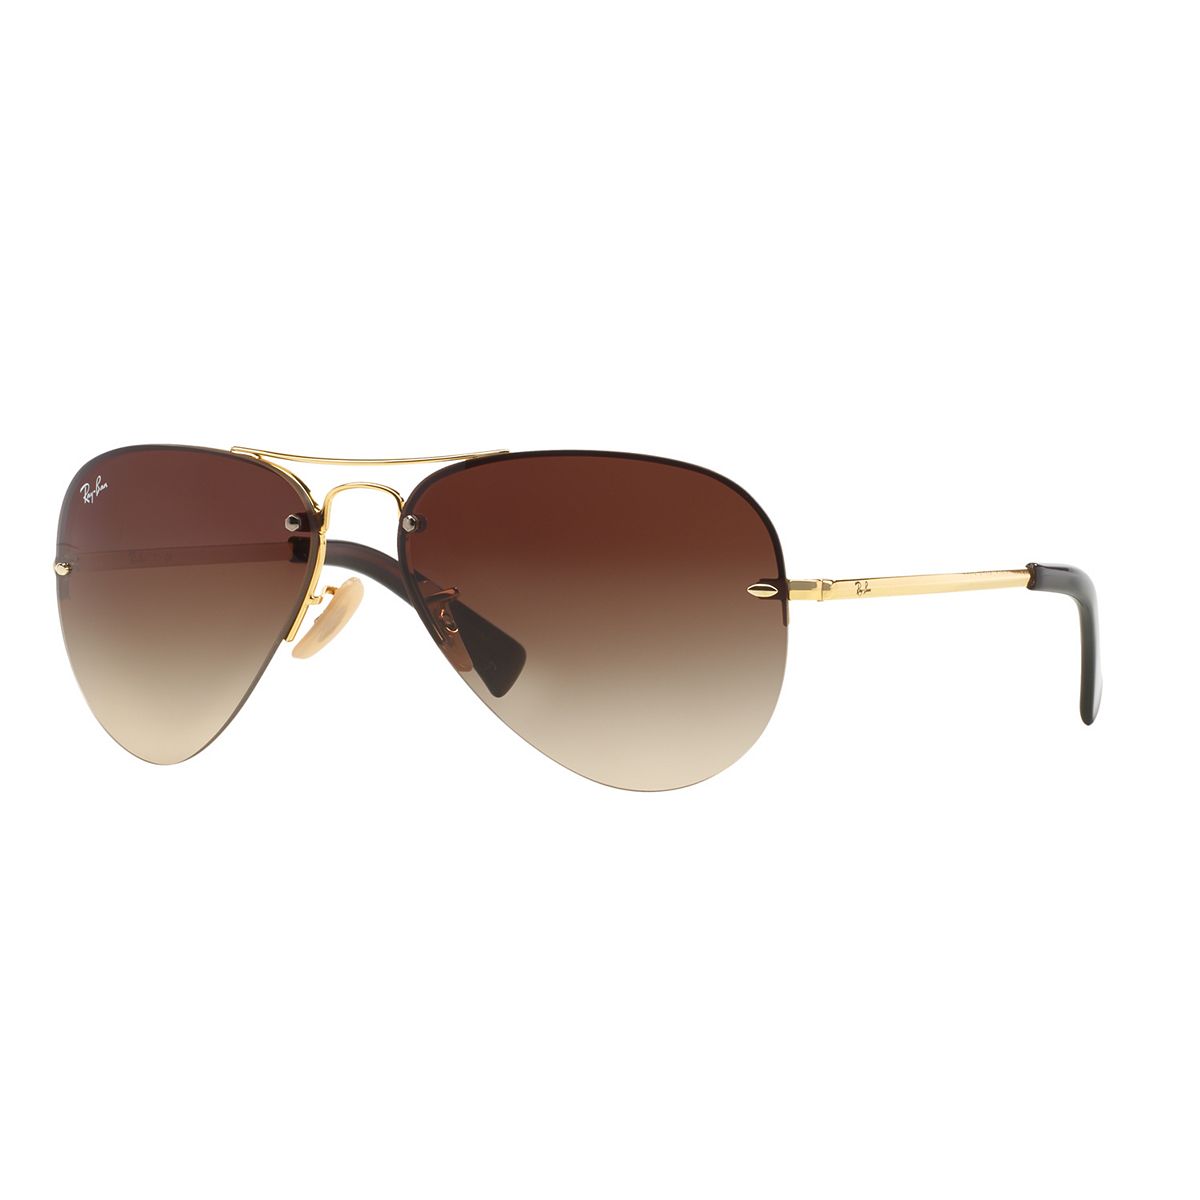 The aviator gradient sunglasses is extremely suitable for beach trips because it can decrease the amount of light passing through the lenses and help reduce glare.